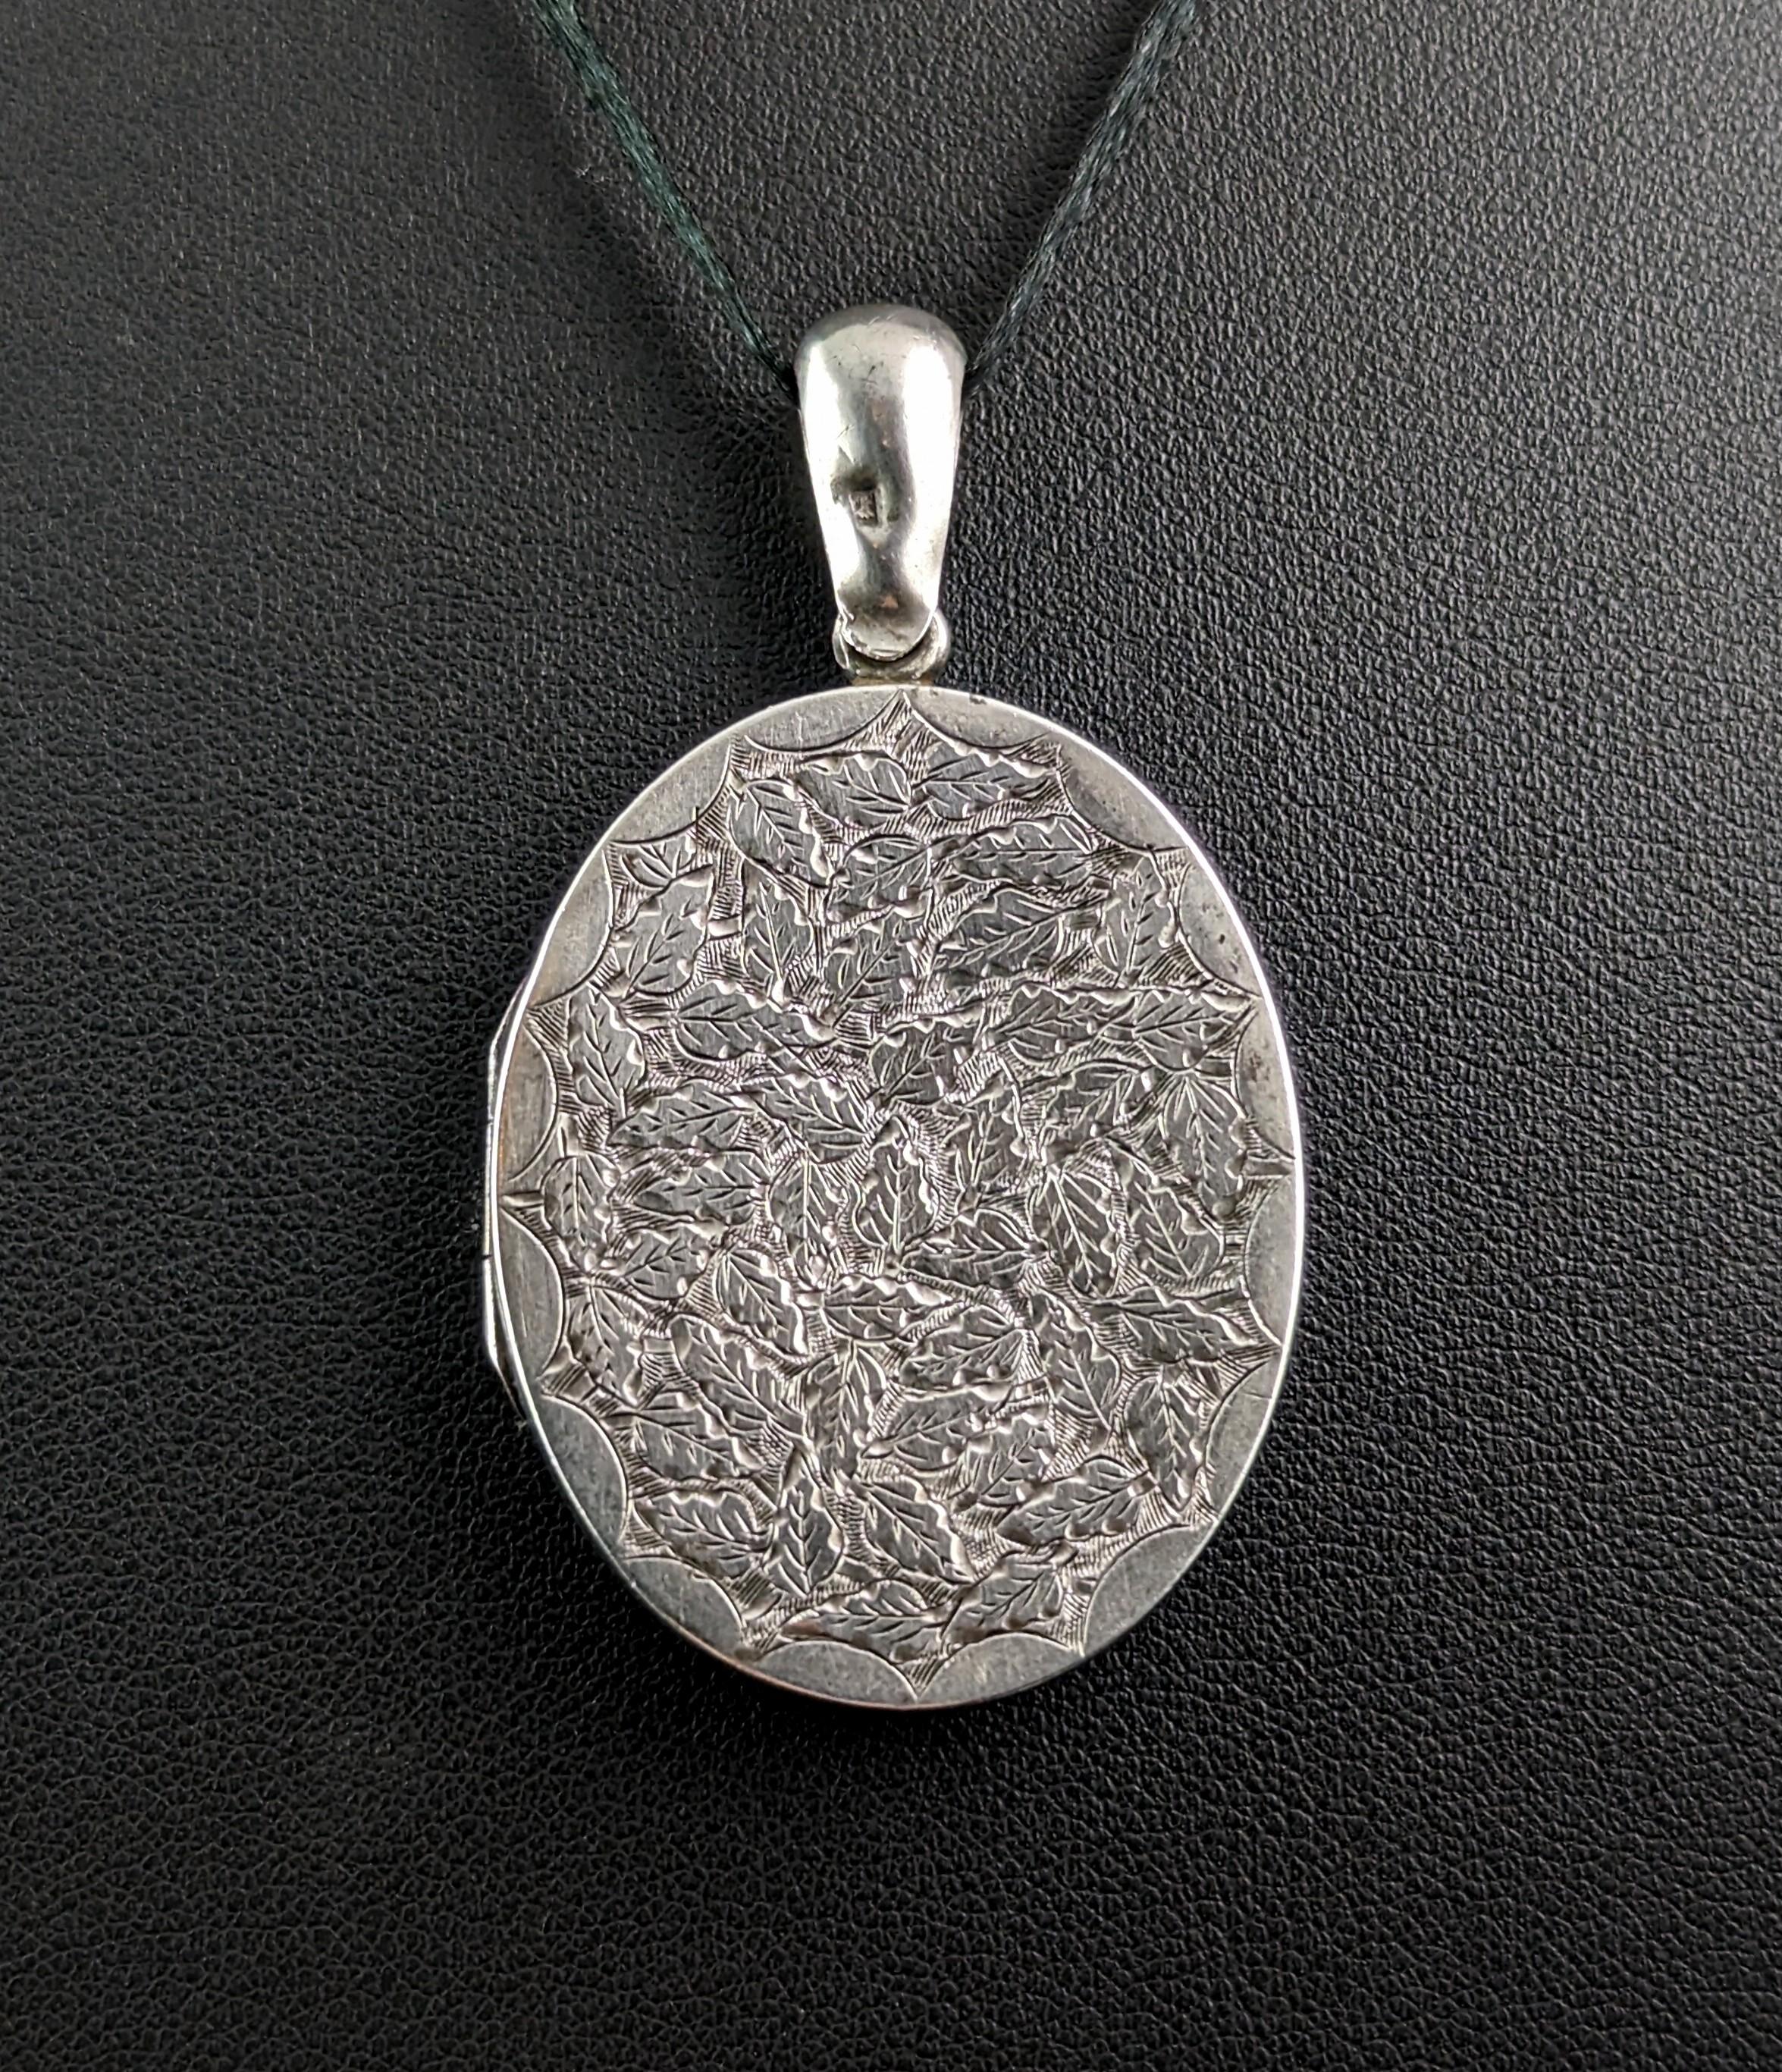 A beautiful Victorian silver locket like this is the perfect piece for adding the finishing touch to your favourite chain or necklace.

This aesthetic era piece is a good sized locket, it has attractive engraving to the front featuring an array of